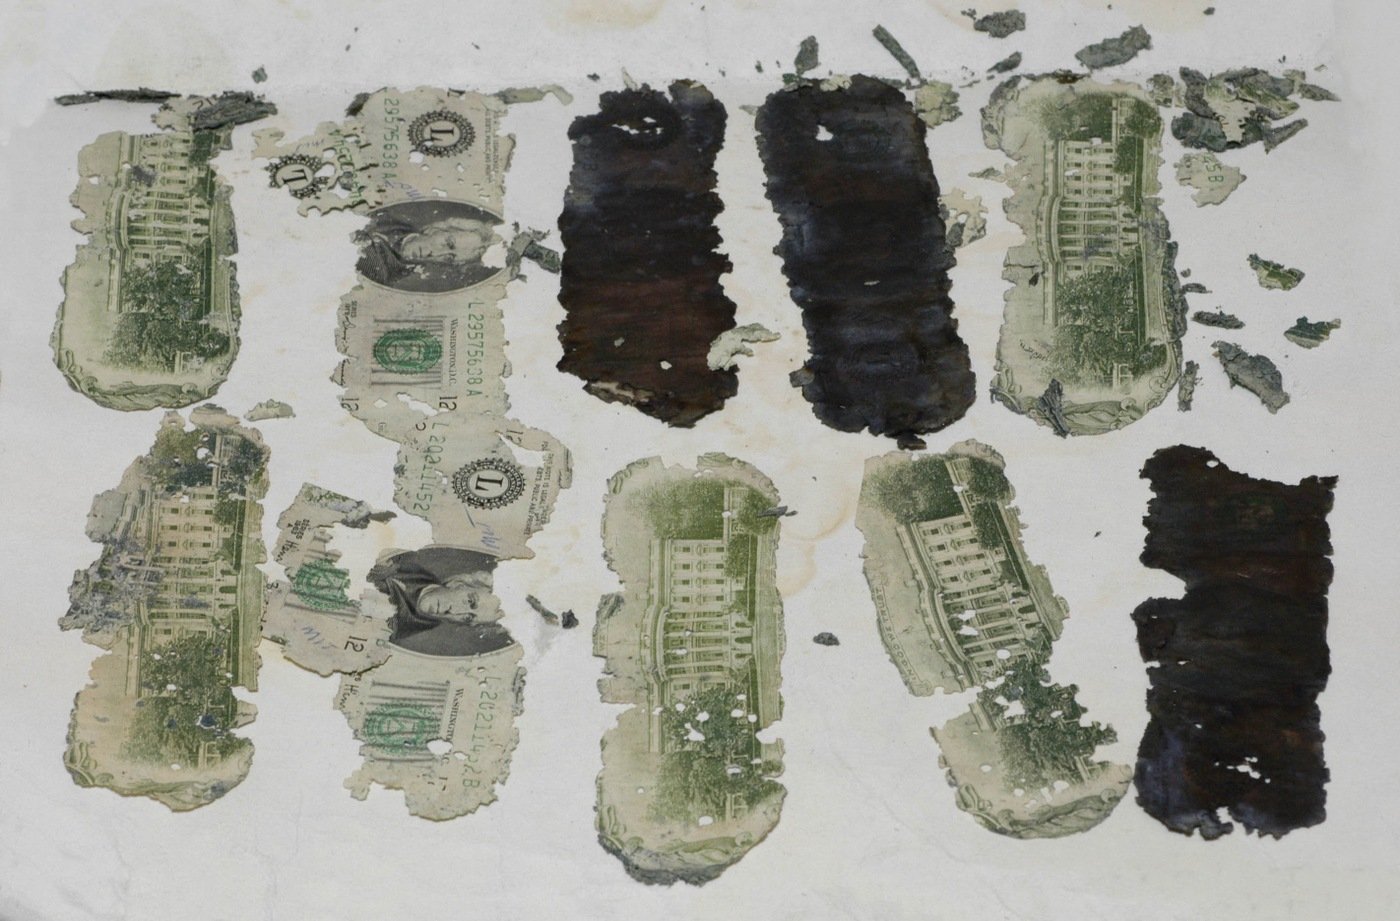 Some of the stolen $20 bills found by a young boy in 1980.